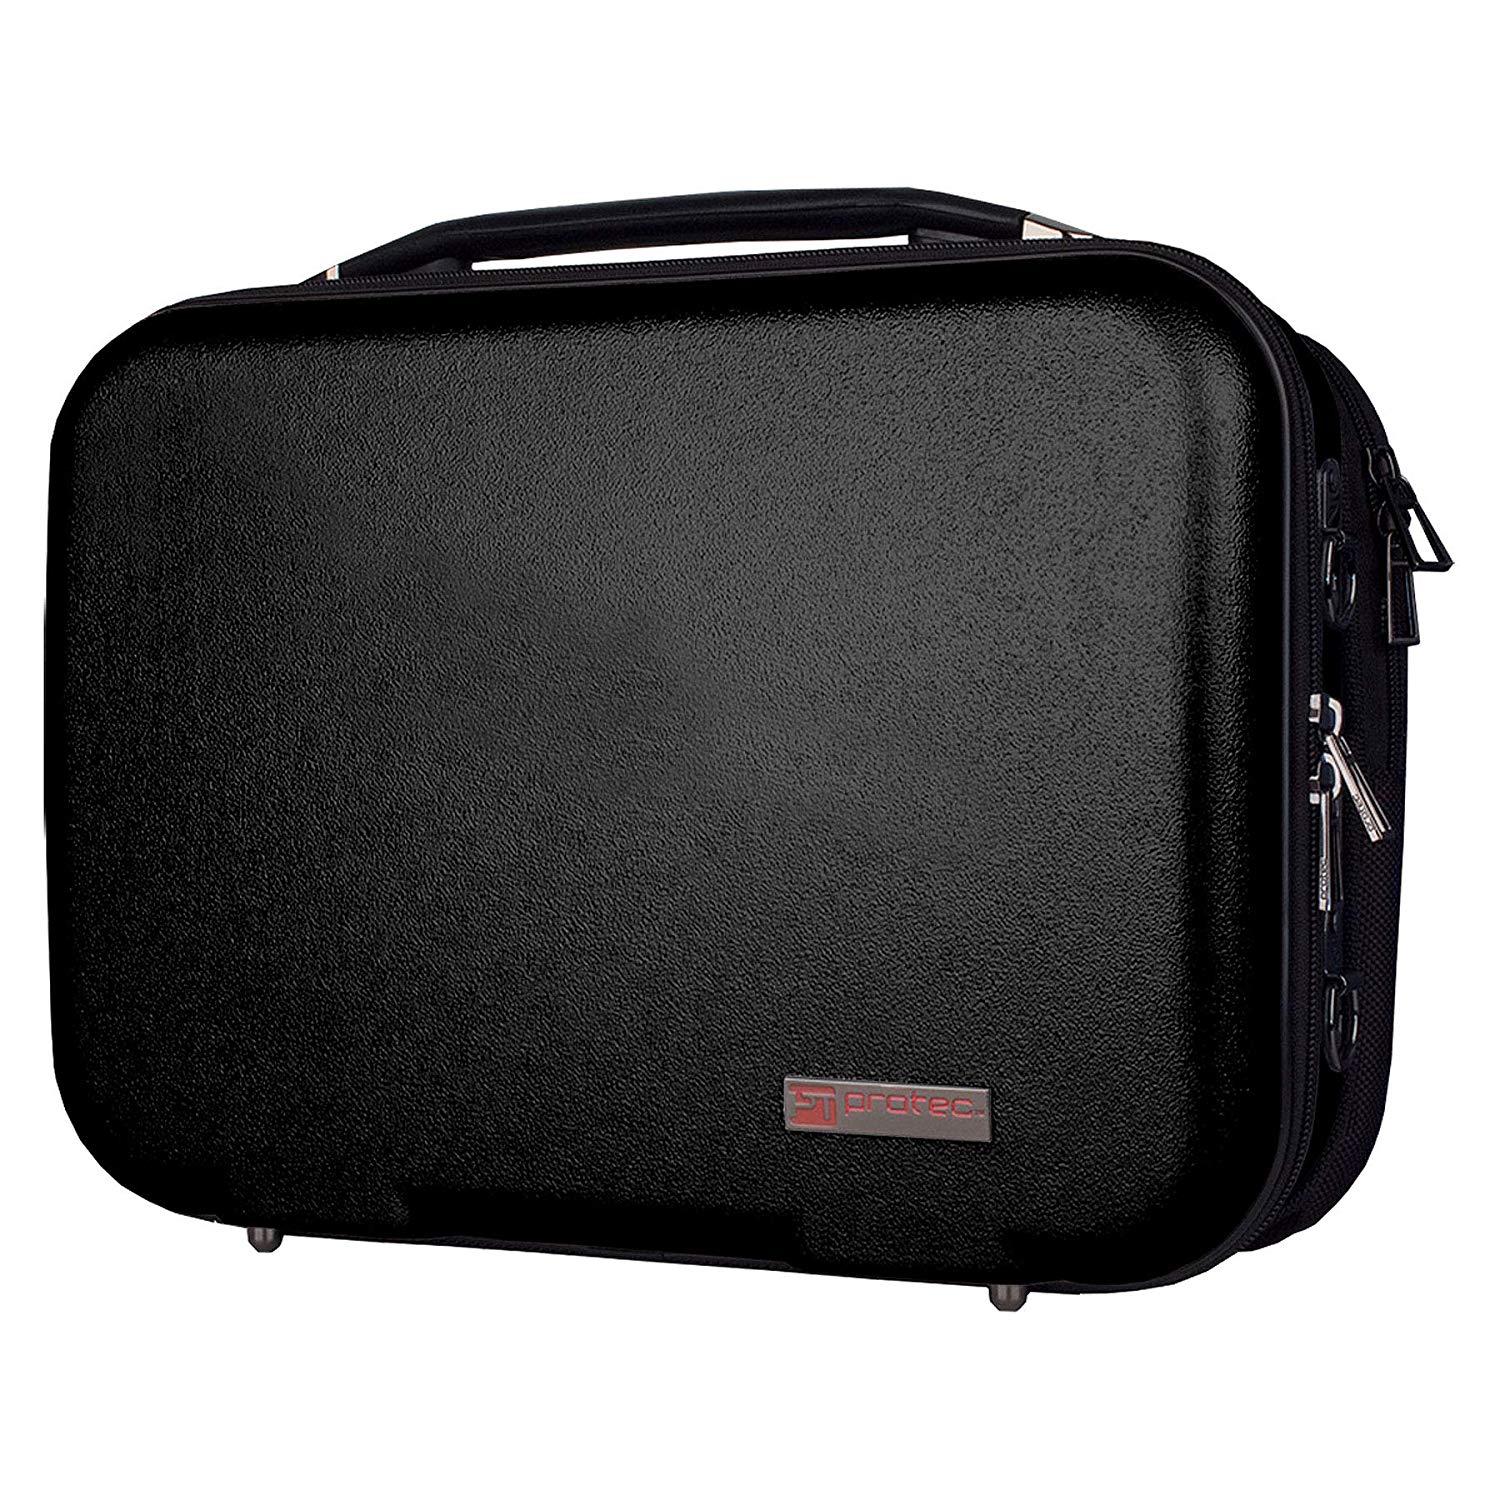 Romsion Slade Thicken Sotrage Bag Clarinet Box Case with Handle Strap Clarinet Protection Accessories